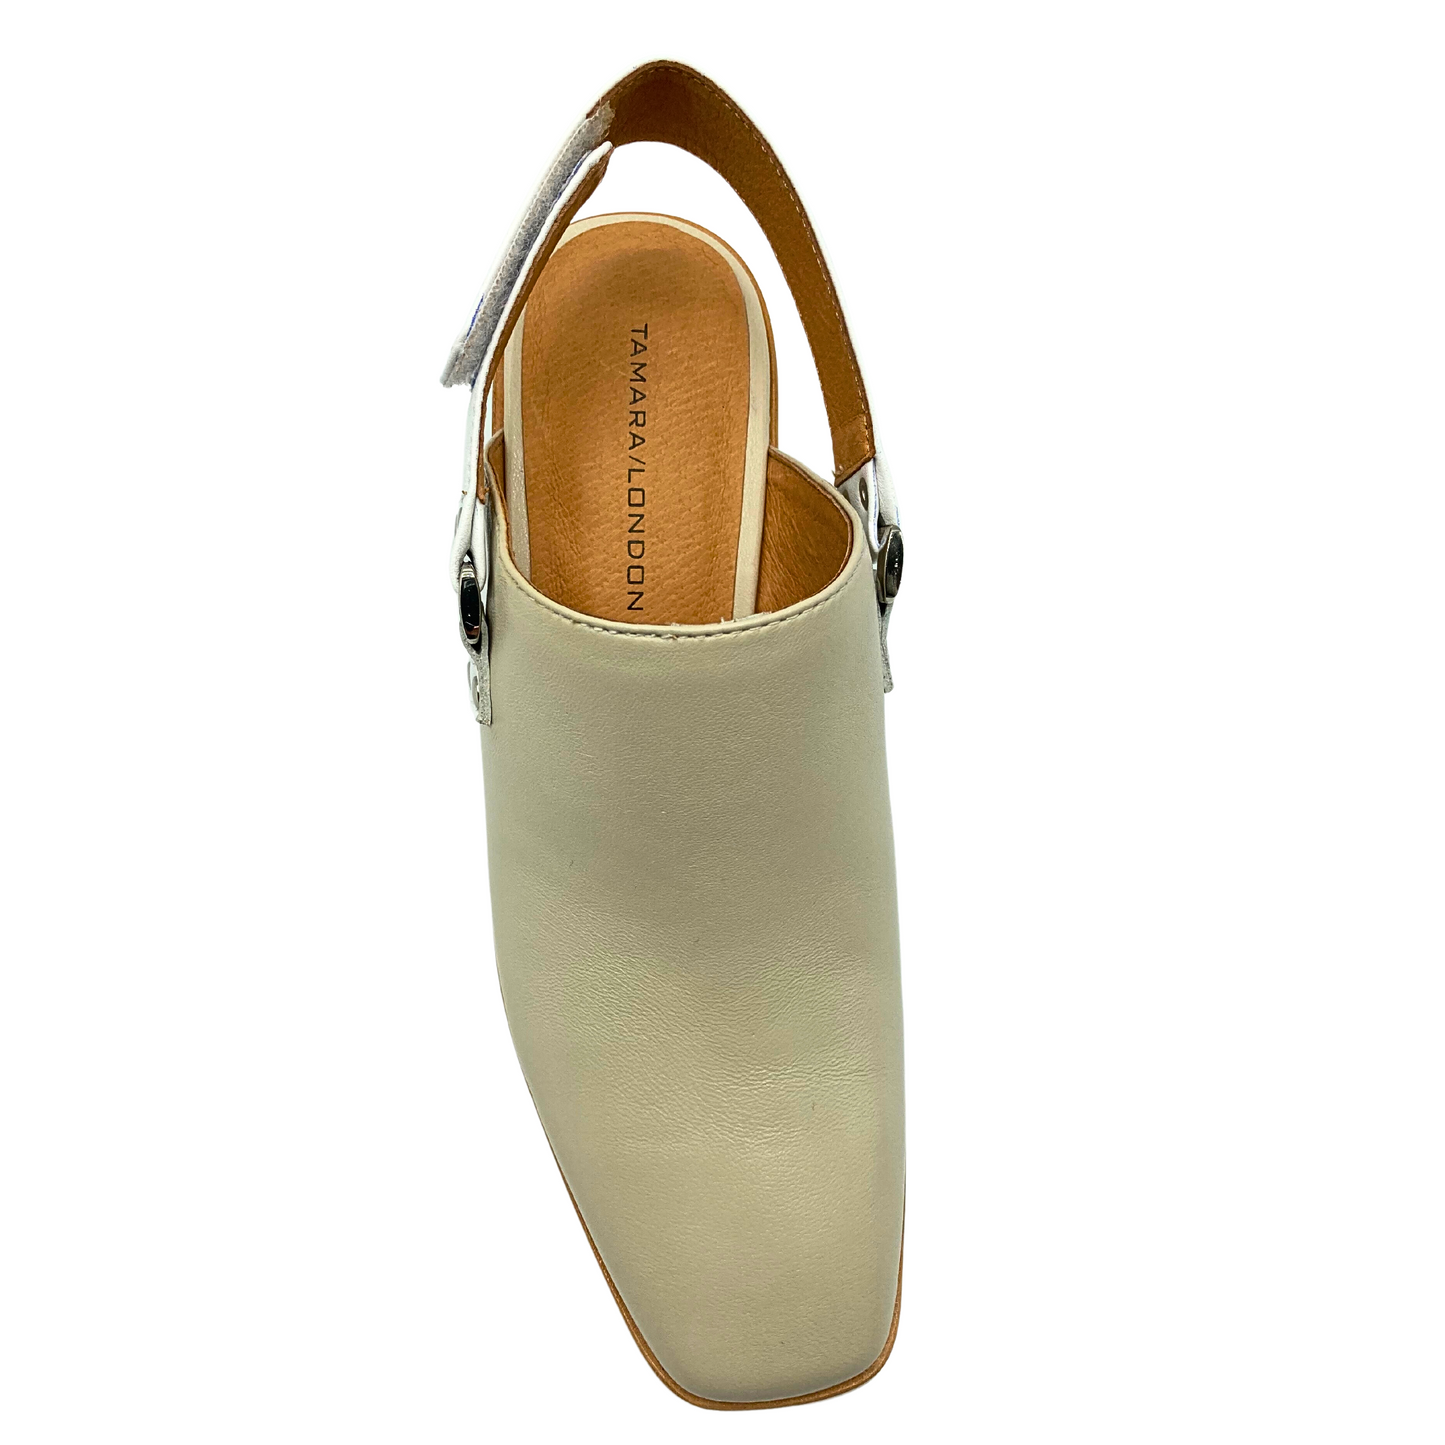 Top down view of a closed toe shoe with an open back.  Taupe color leather upper and a white back strap